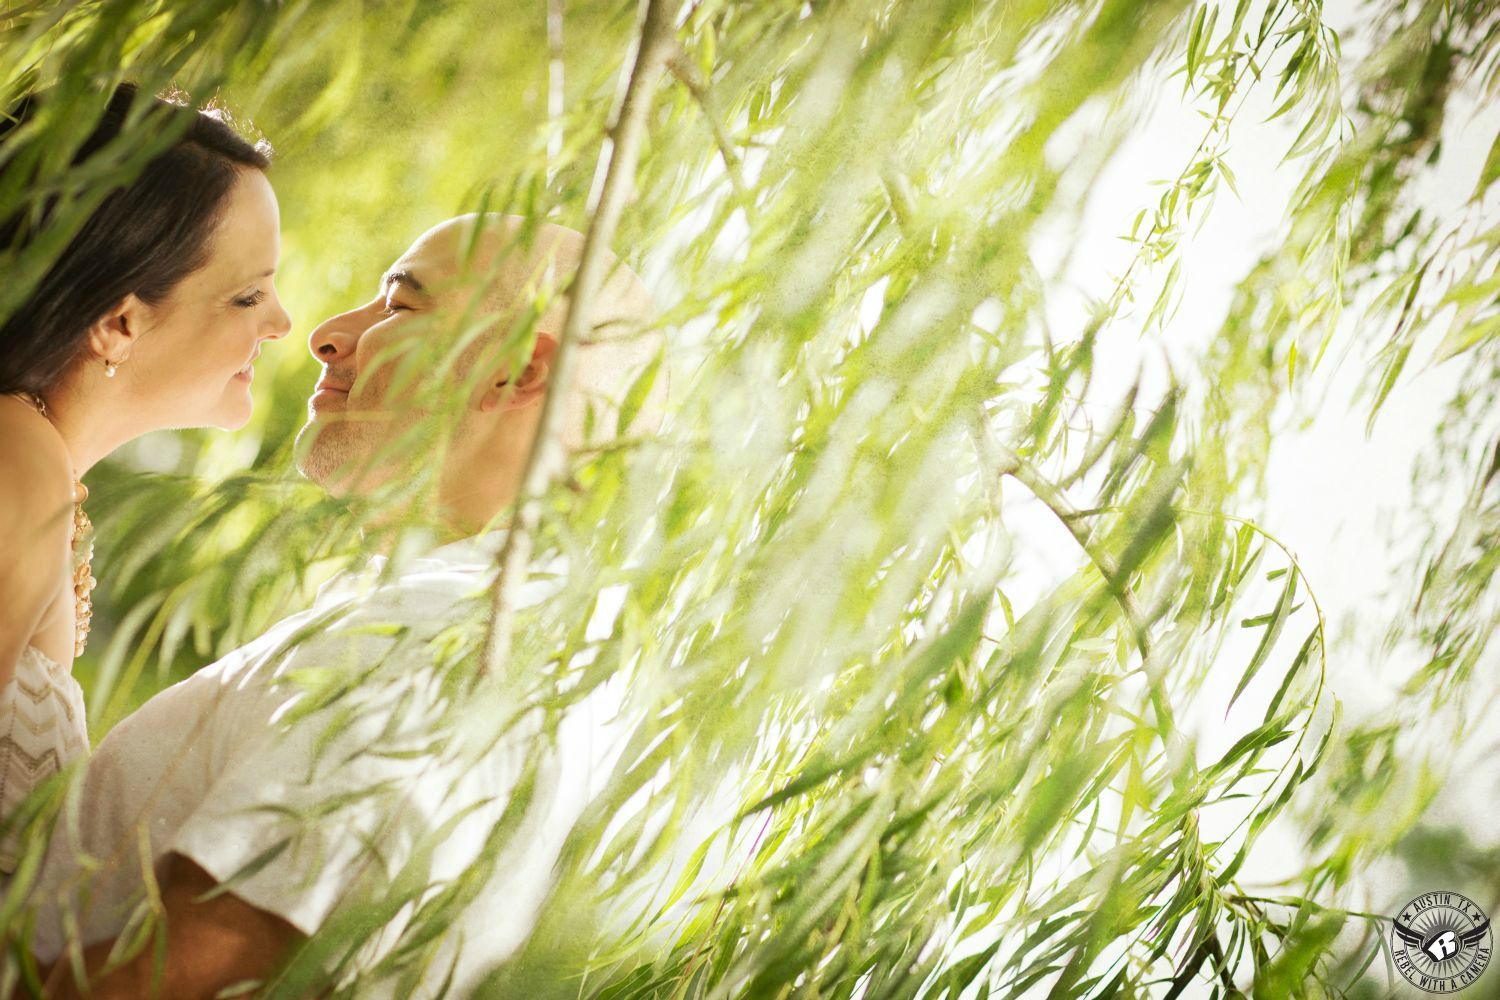 Dark haired lady with pearl earring and beaded  necklace and shirt with chevrons looks into the eyes of a guy with a shaved head in a short sleeve white shirt partially obscured by willow tree branches with lots of soft green leaves all around then at Butler Park near the pond in this breathtaking engagement pic in downtown Austin. 